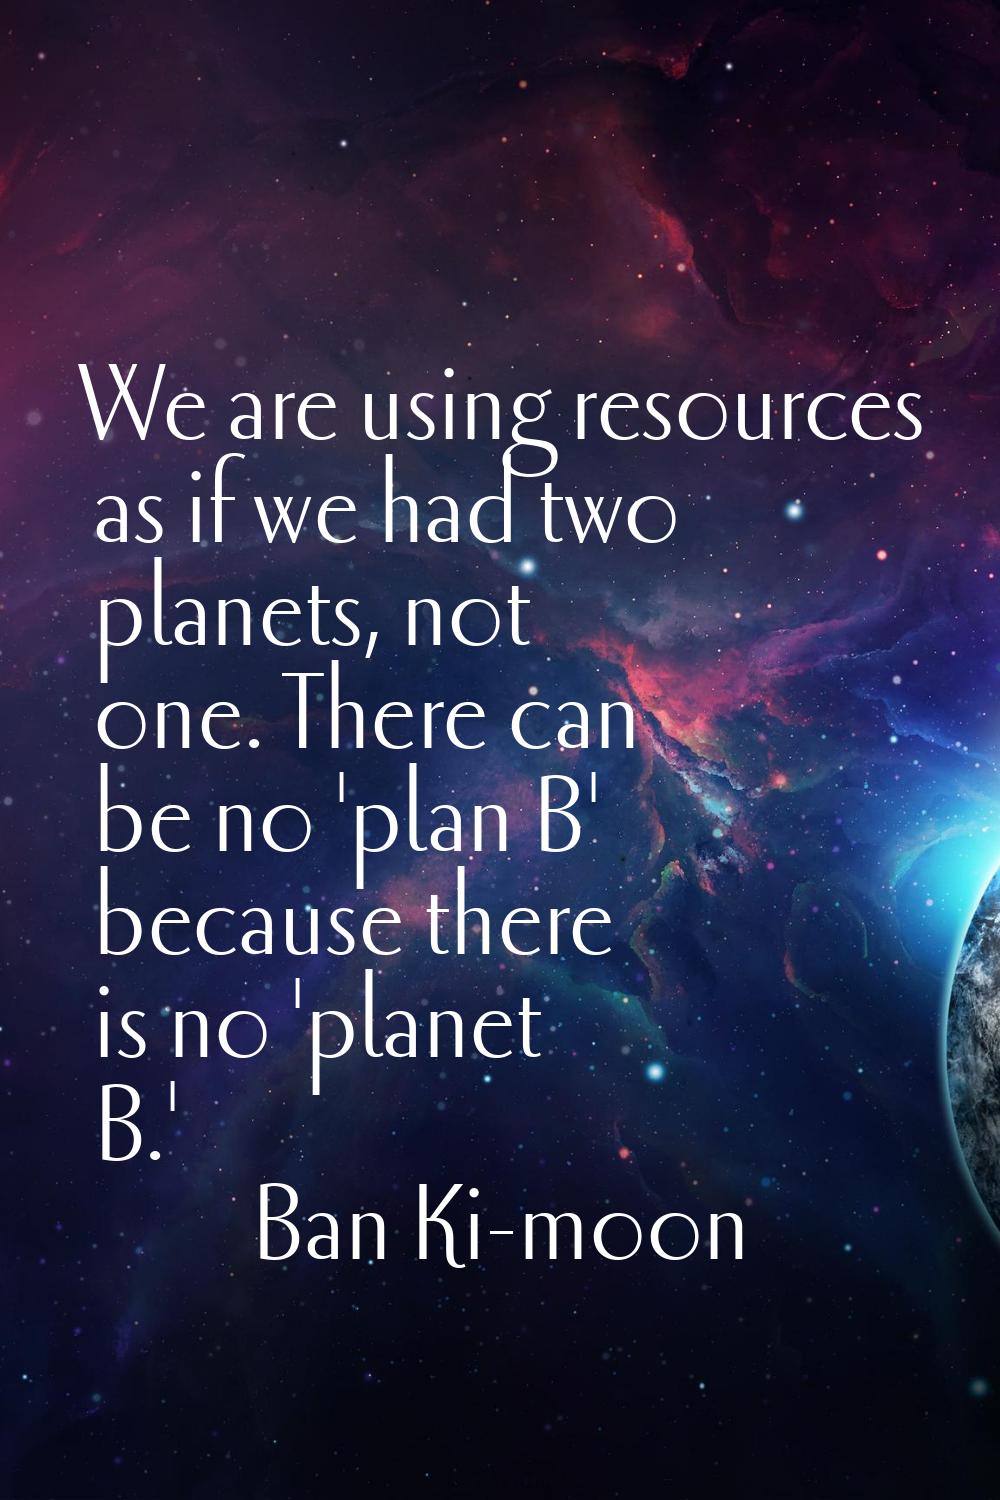 We are using resources as if we had two planets, not one. There can be no 'plan B' because there is